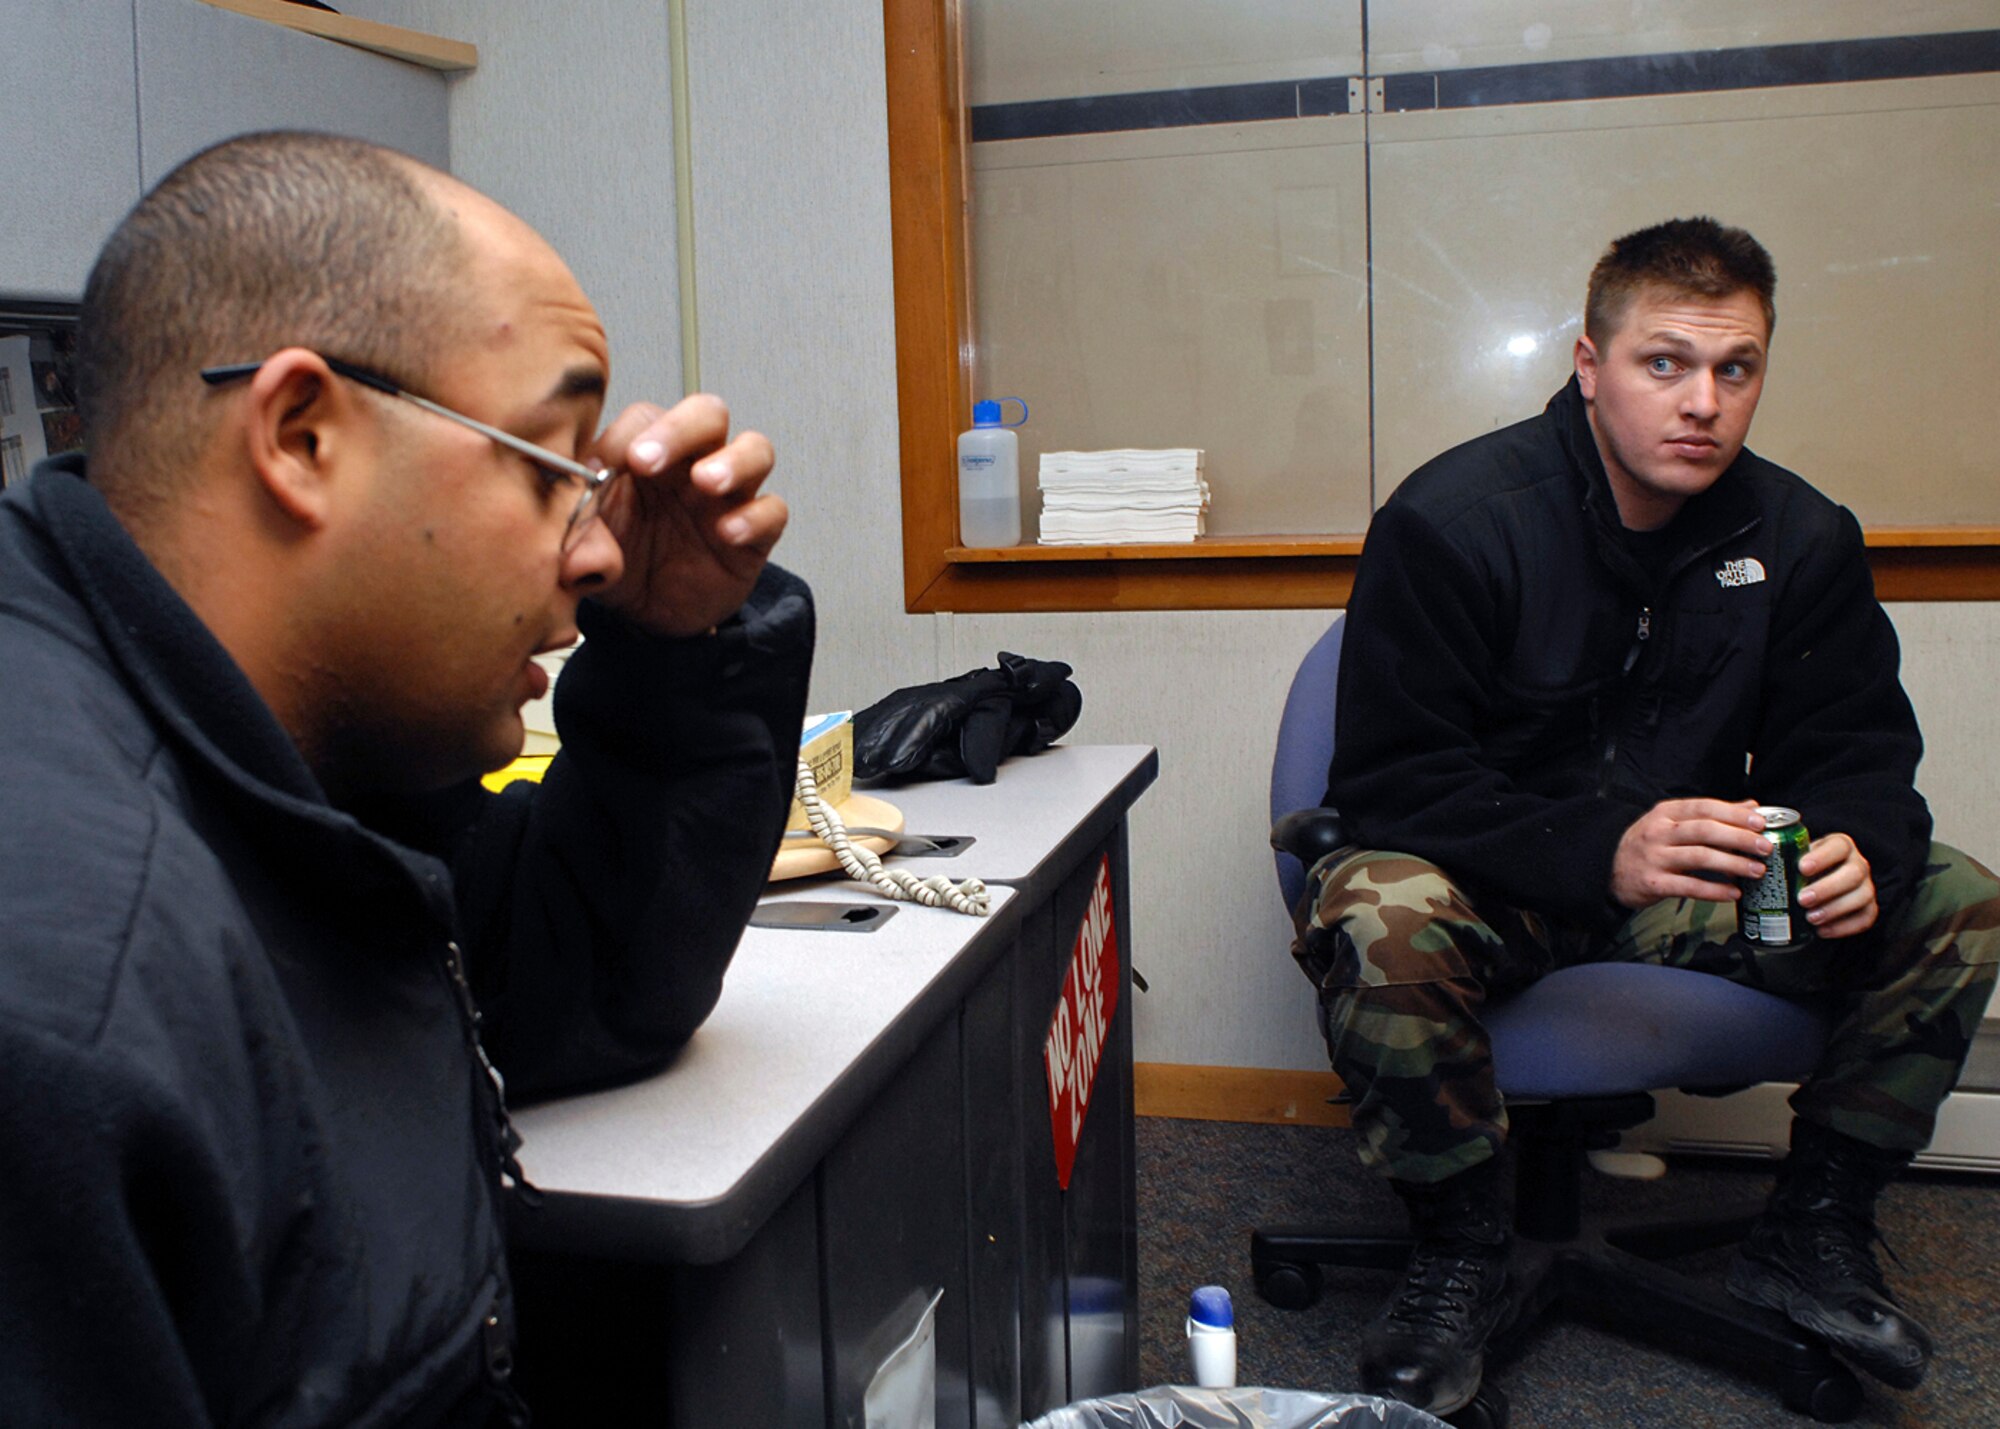 KIRTLAND AIR FORCE BASE, N.M. -- Senior Airman William Zow (foreground) and Senior Airman Nick Worthington (background) discuss their experiences while they were deployed in support of Operation Iraqi Freedom. (U.S. Air Force photo by Todd Berenger)